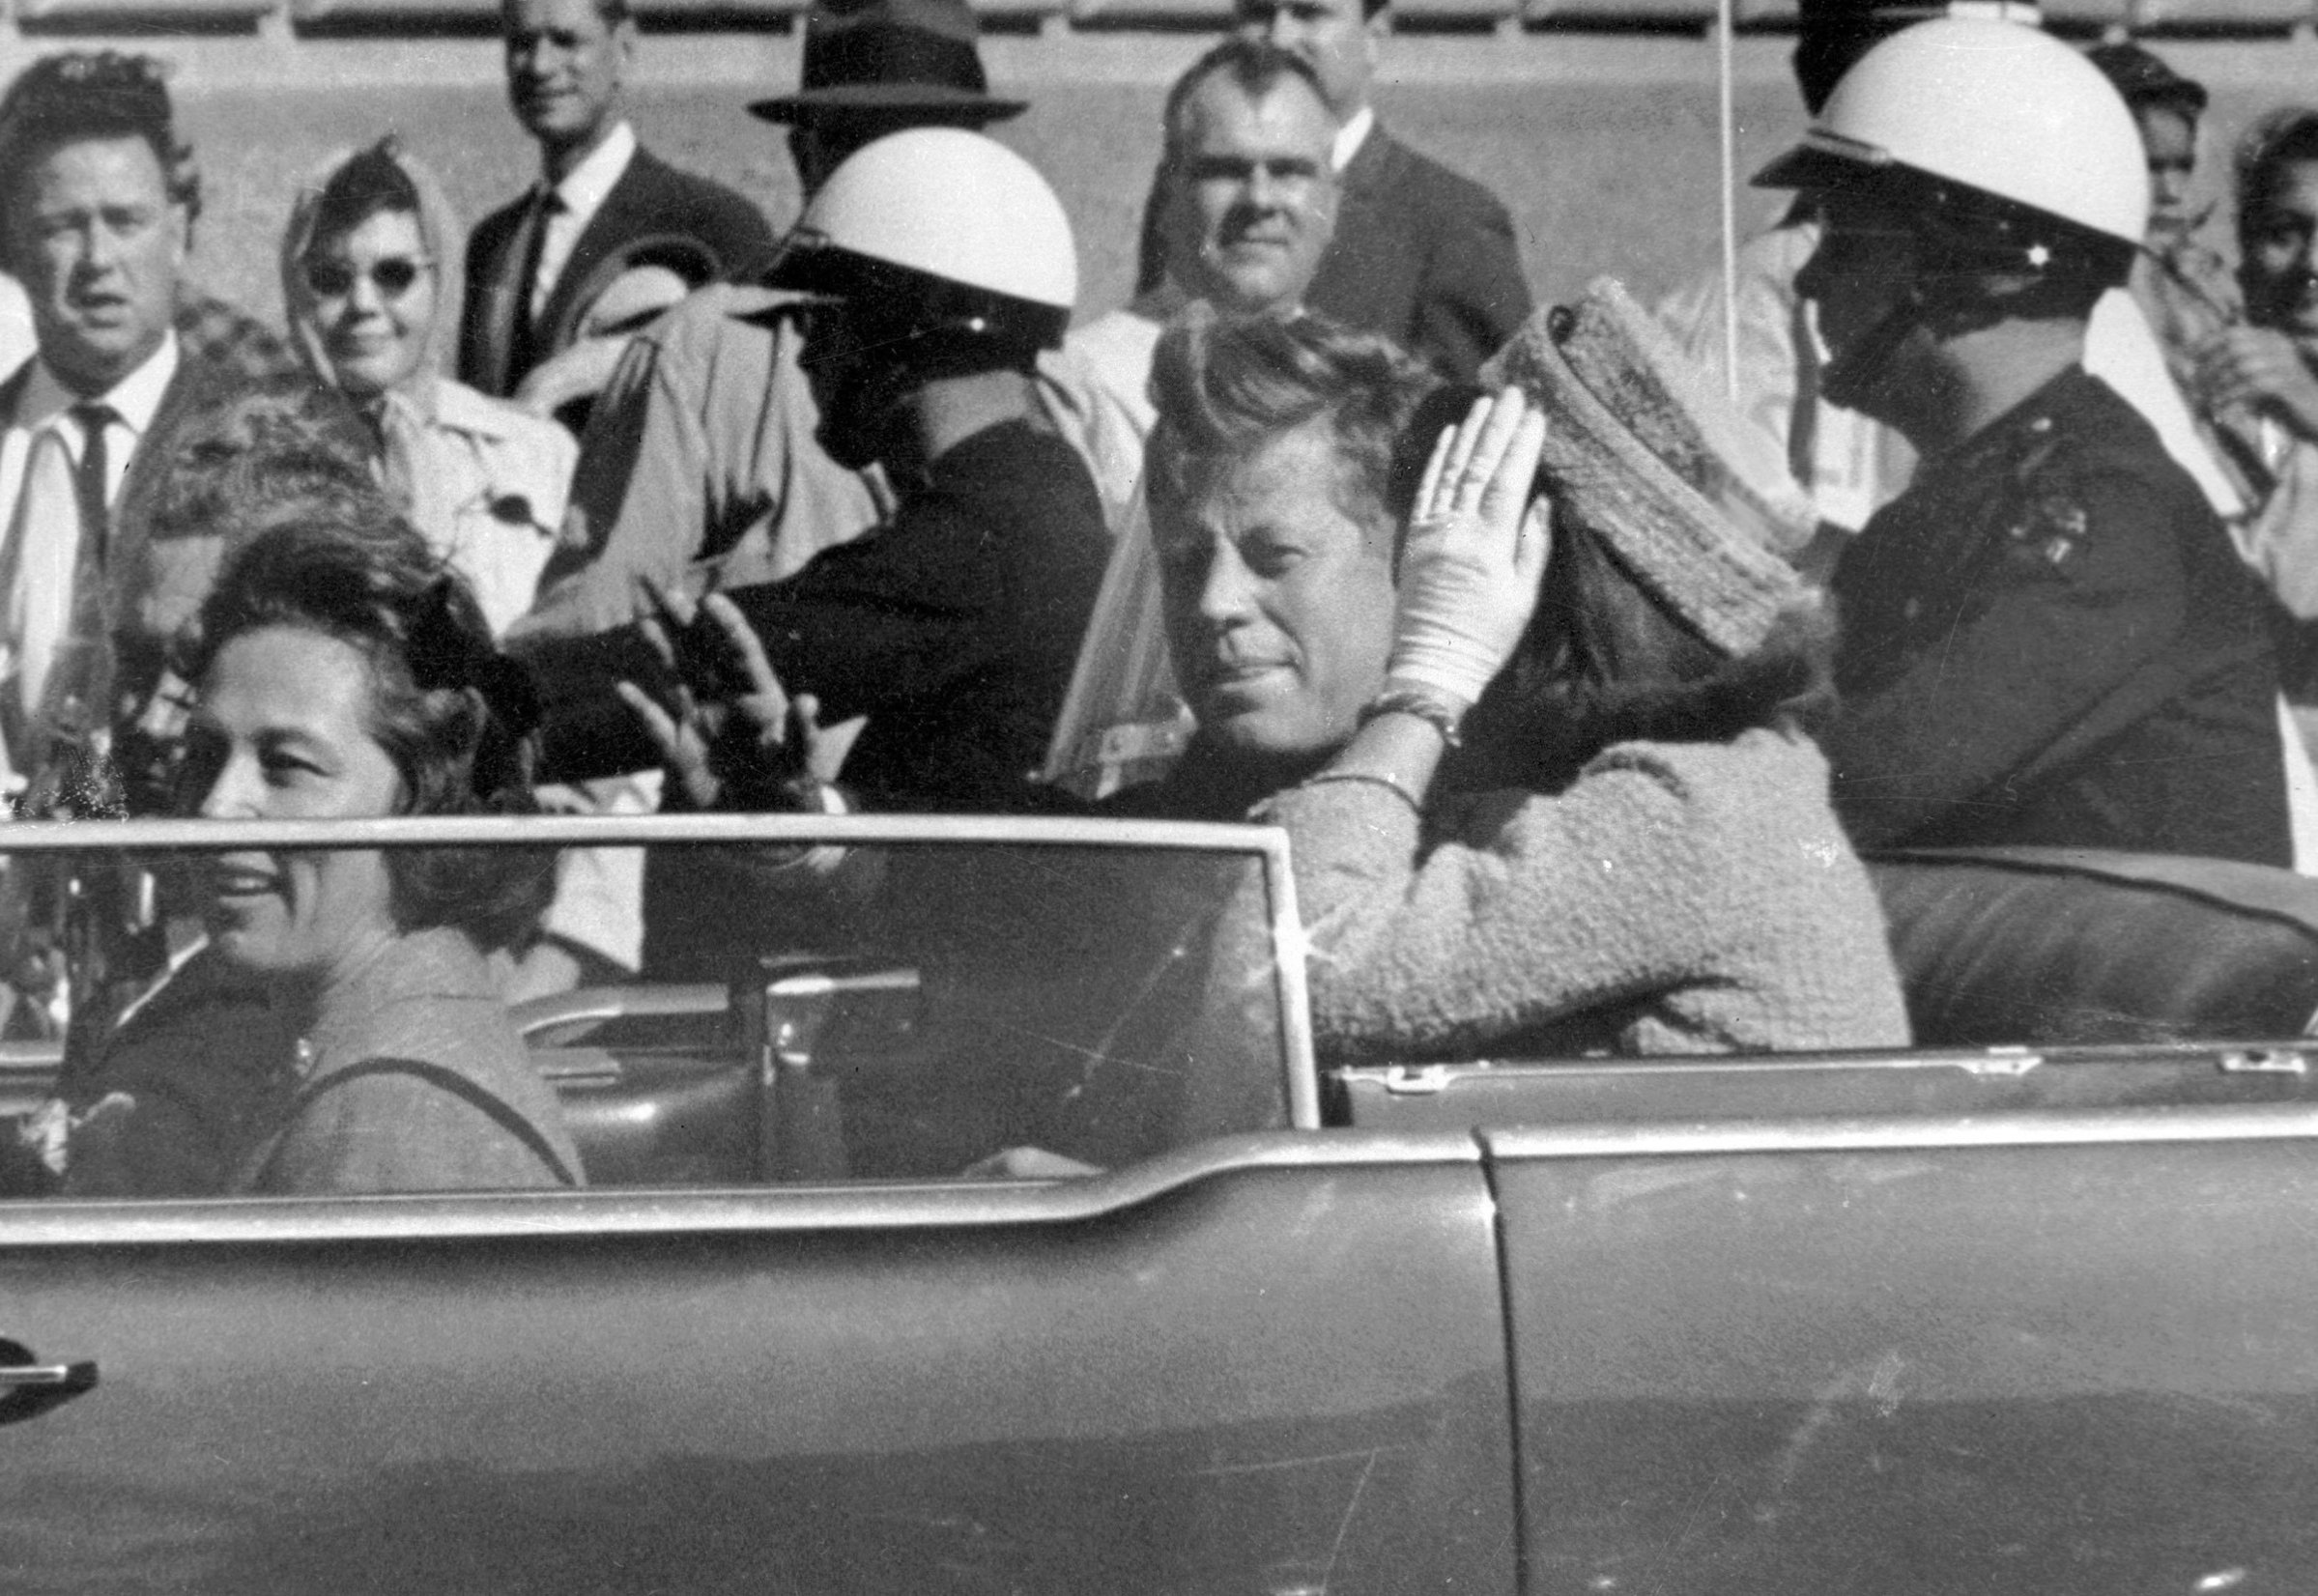 President John F. Kennedy waves from his car in a motorcade in Dallas on Nov. 22, 1963.